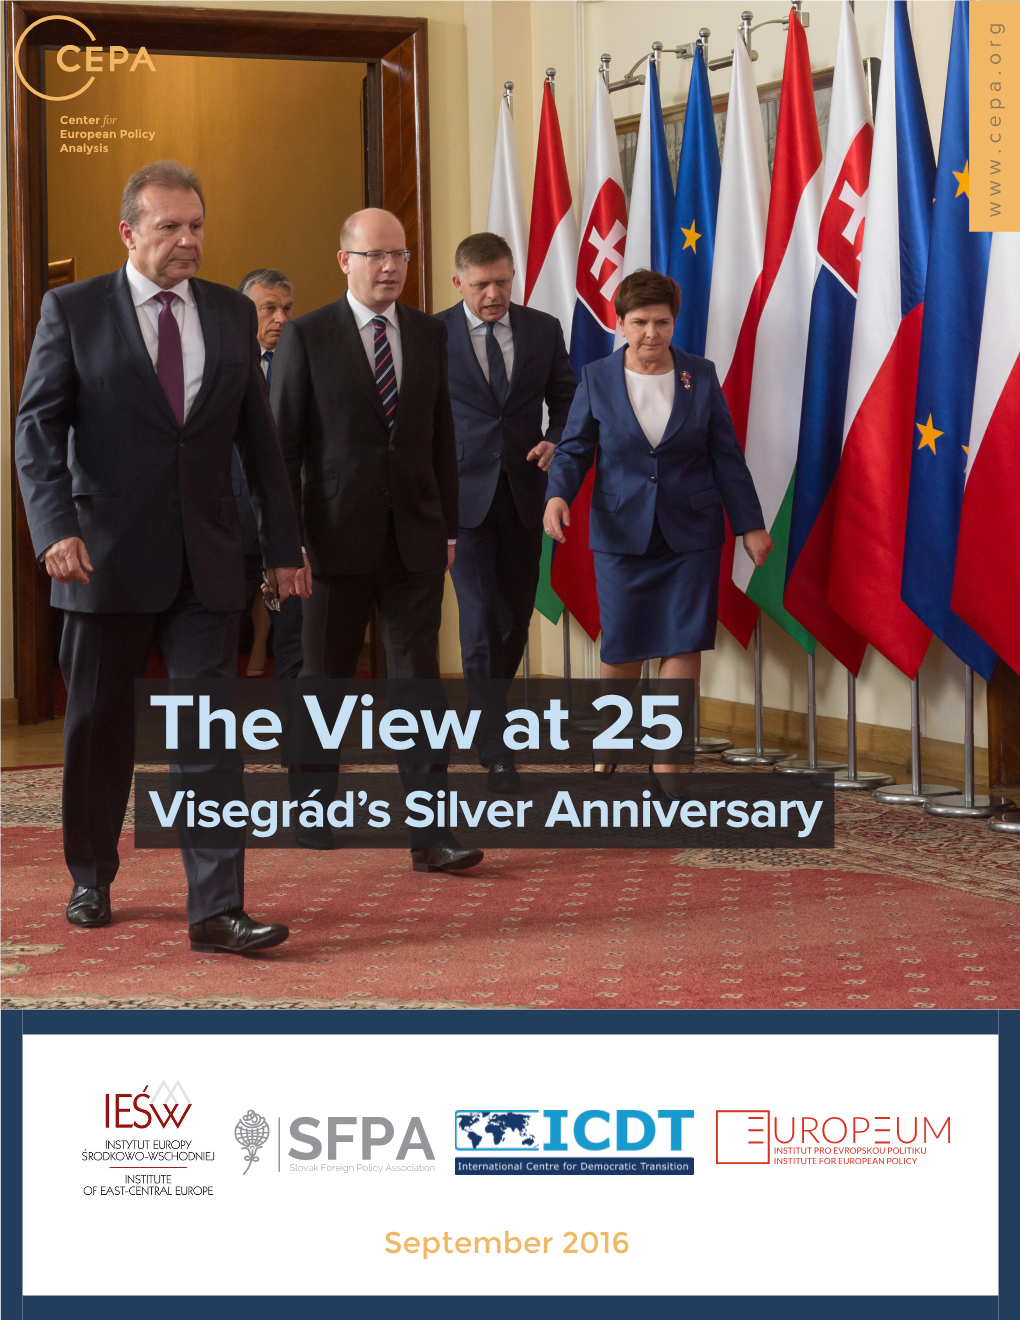 The View at 25 Visegrád’S Silver Anniversary